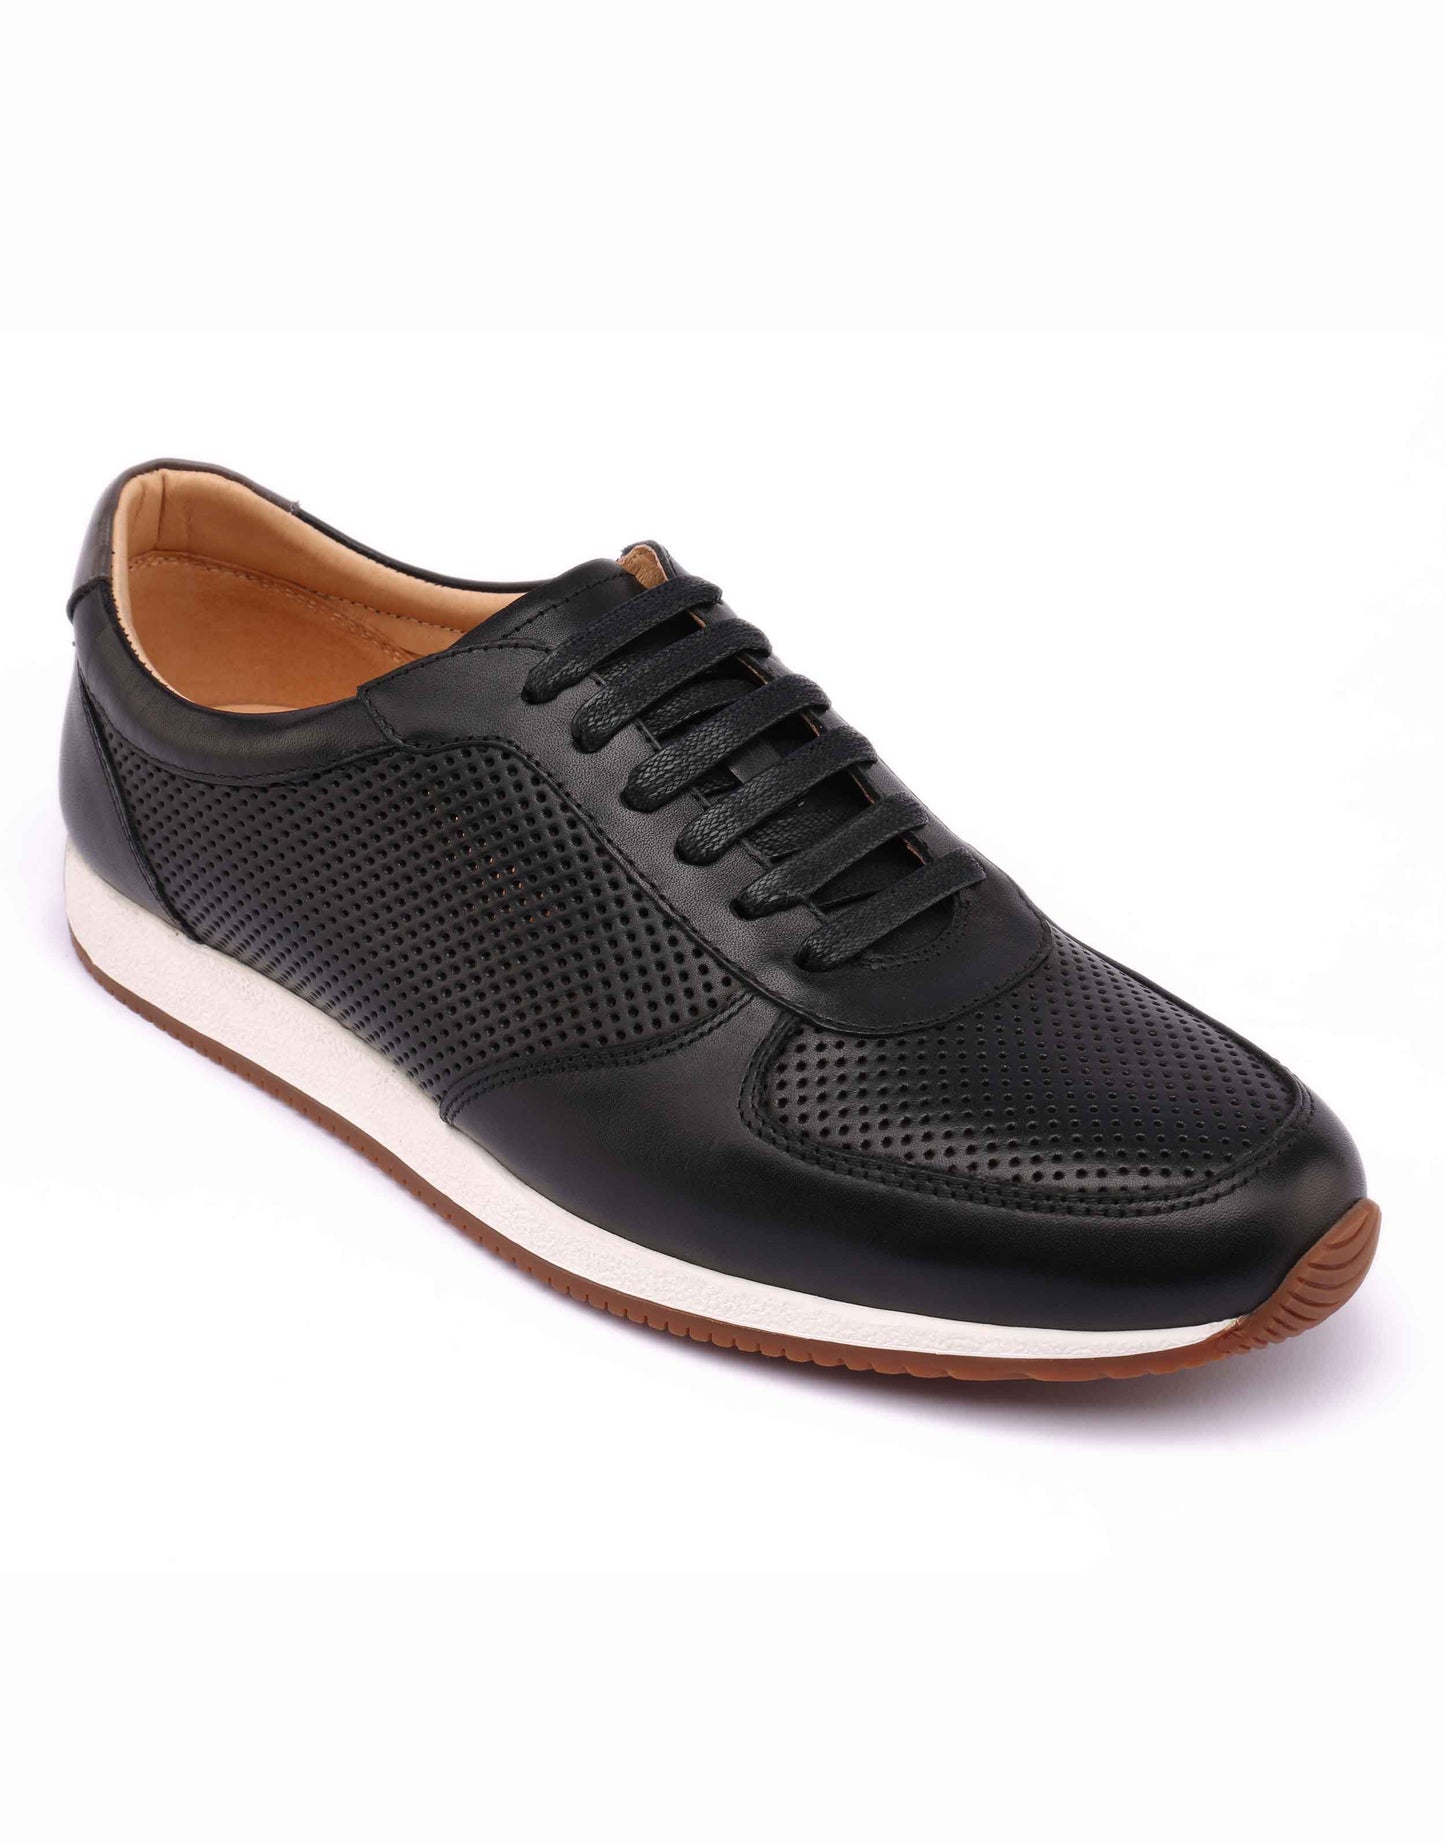 Perforated Black Leather Sneakers